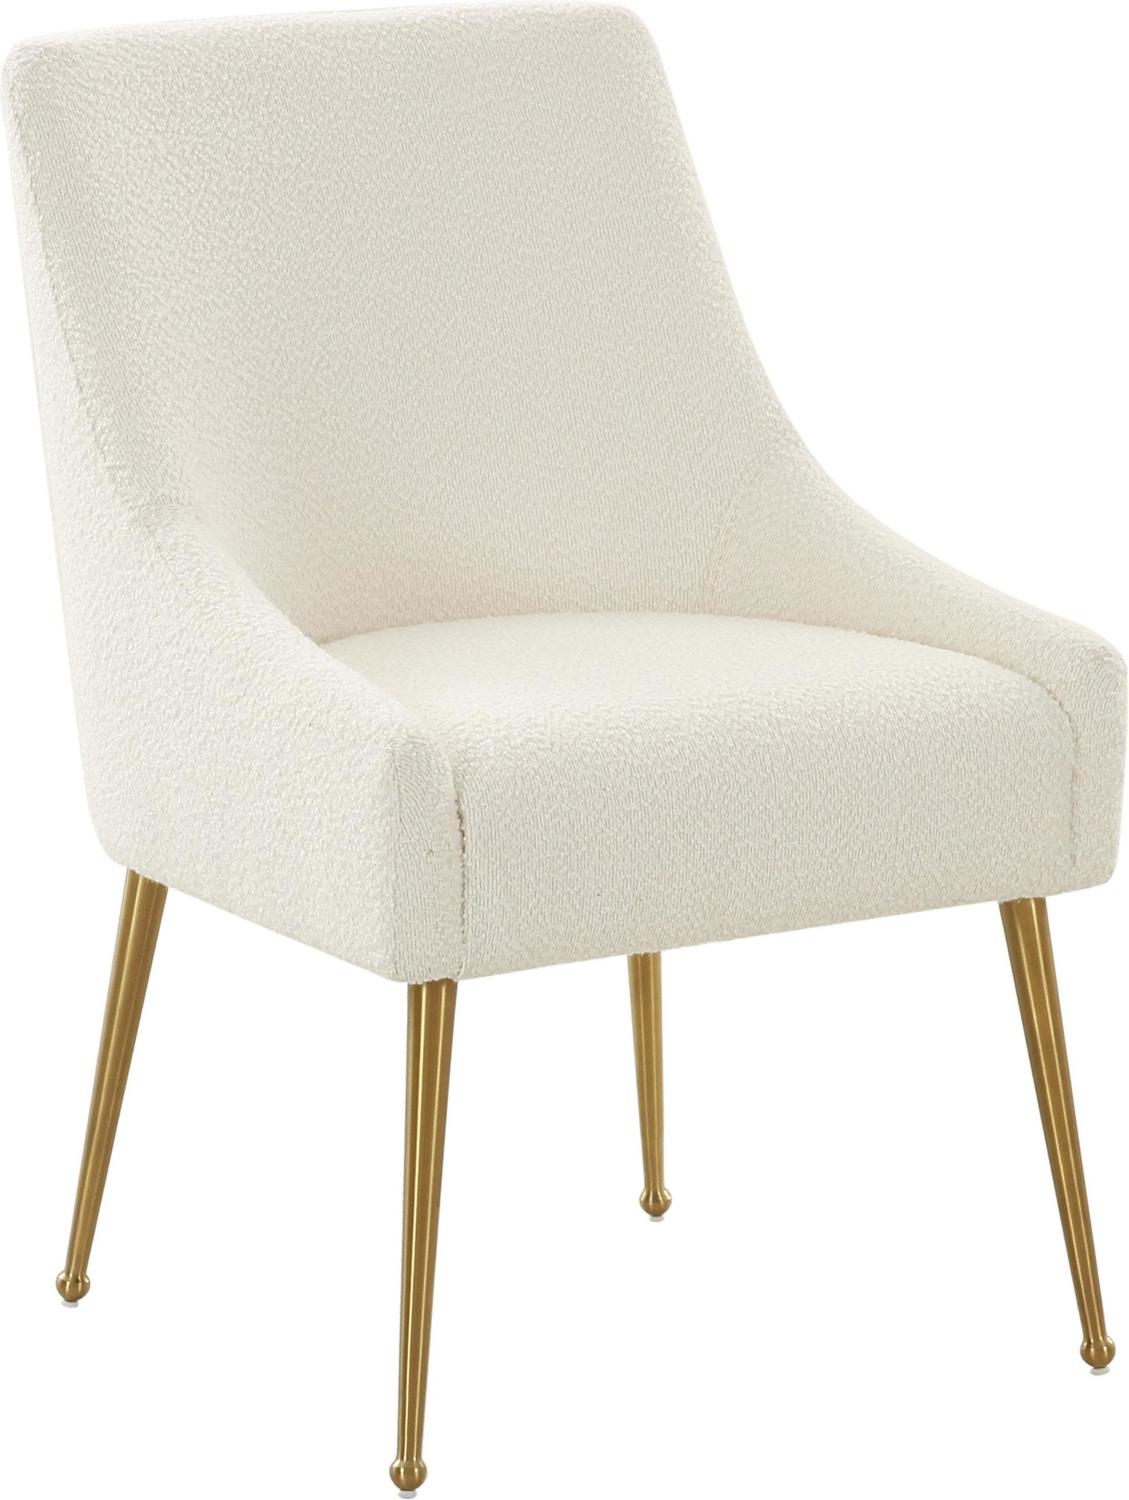 navy occasional chair Contemporary Design Furniture Dining Chairs Cream